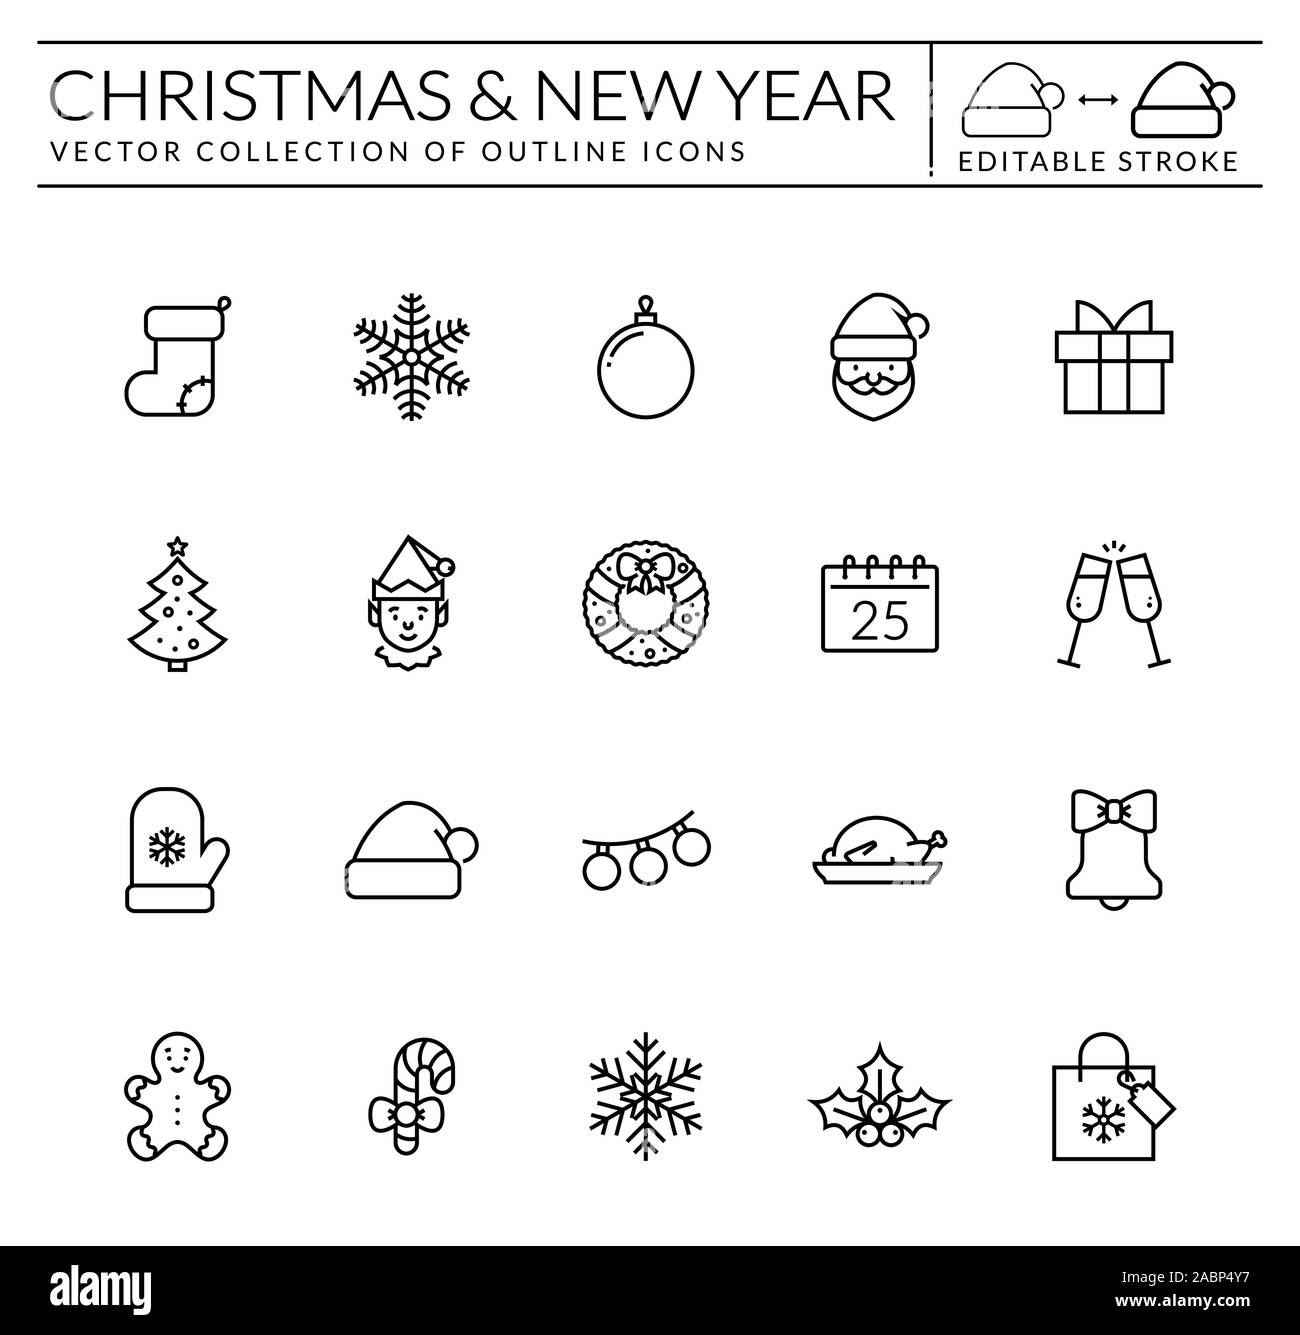 Christmas and New Year line icon set. Outline vector collection. Xmas and Season's Greetings symbols isolated on white background. Editable stroke. Stock Vector